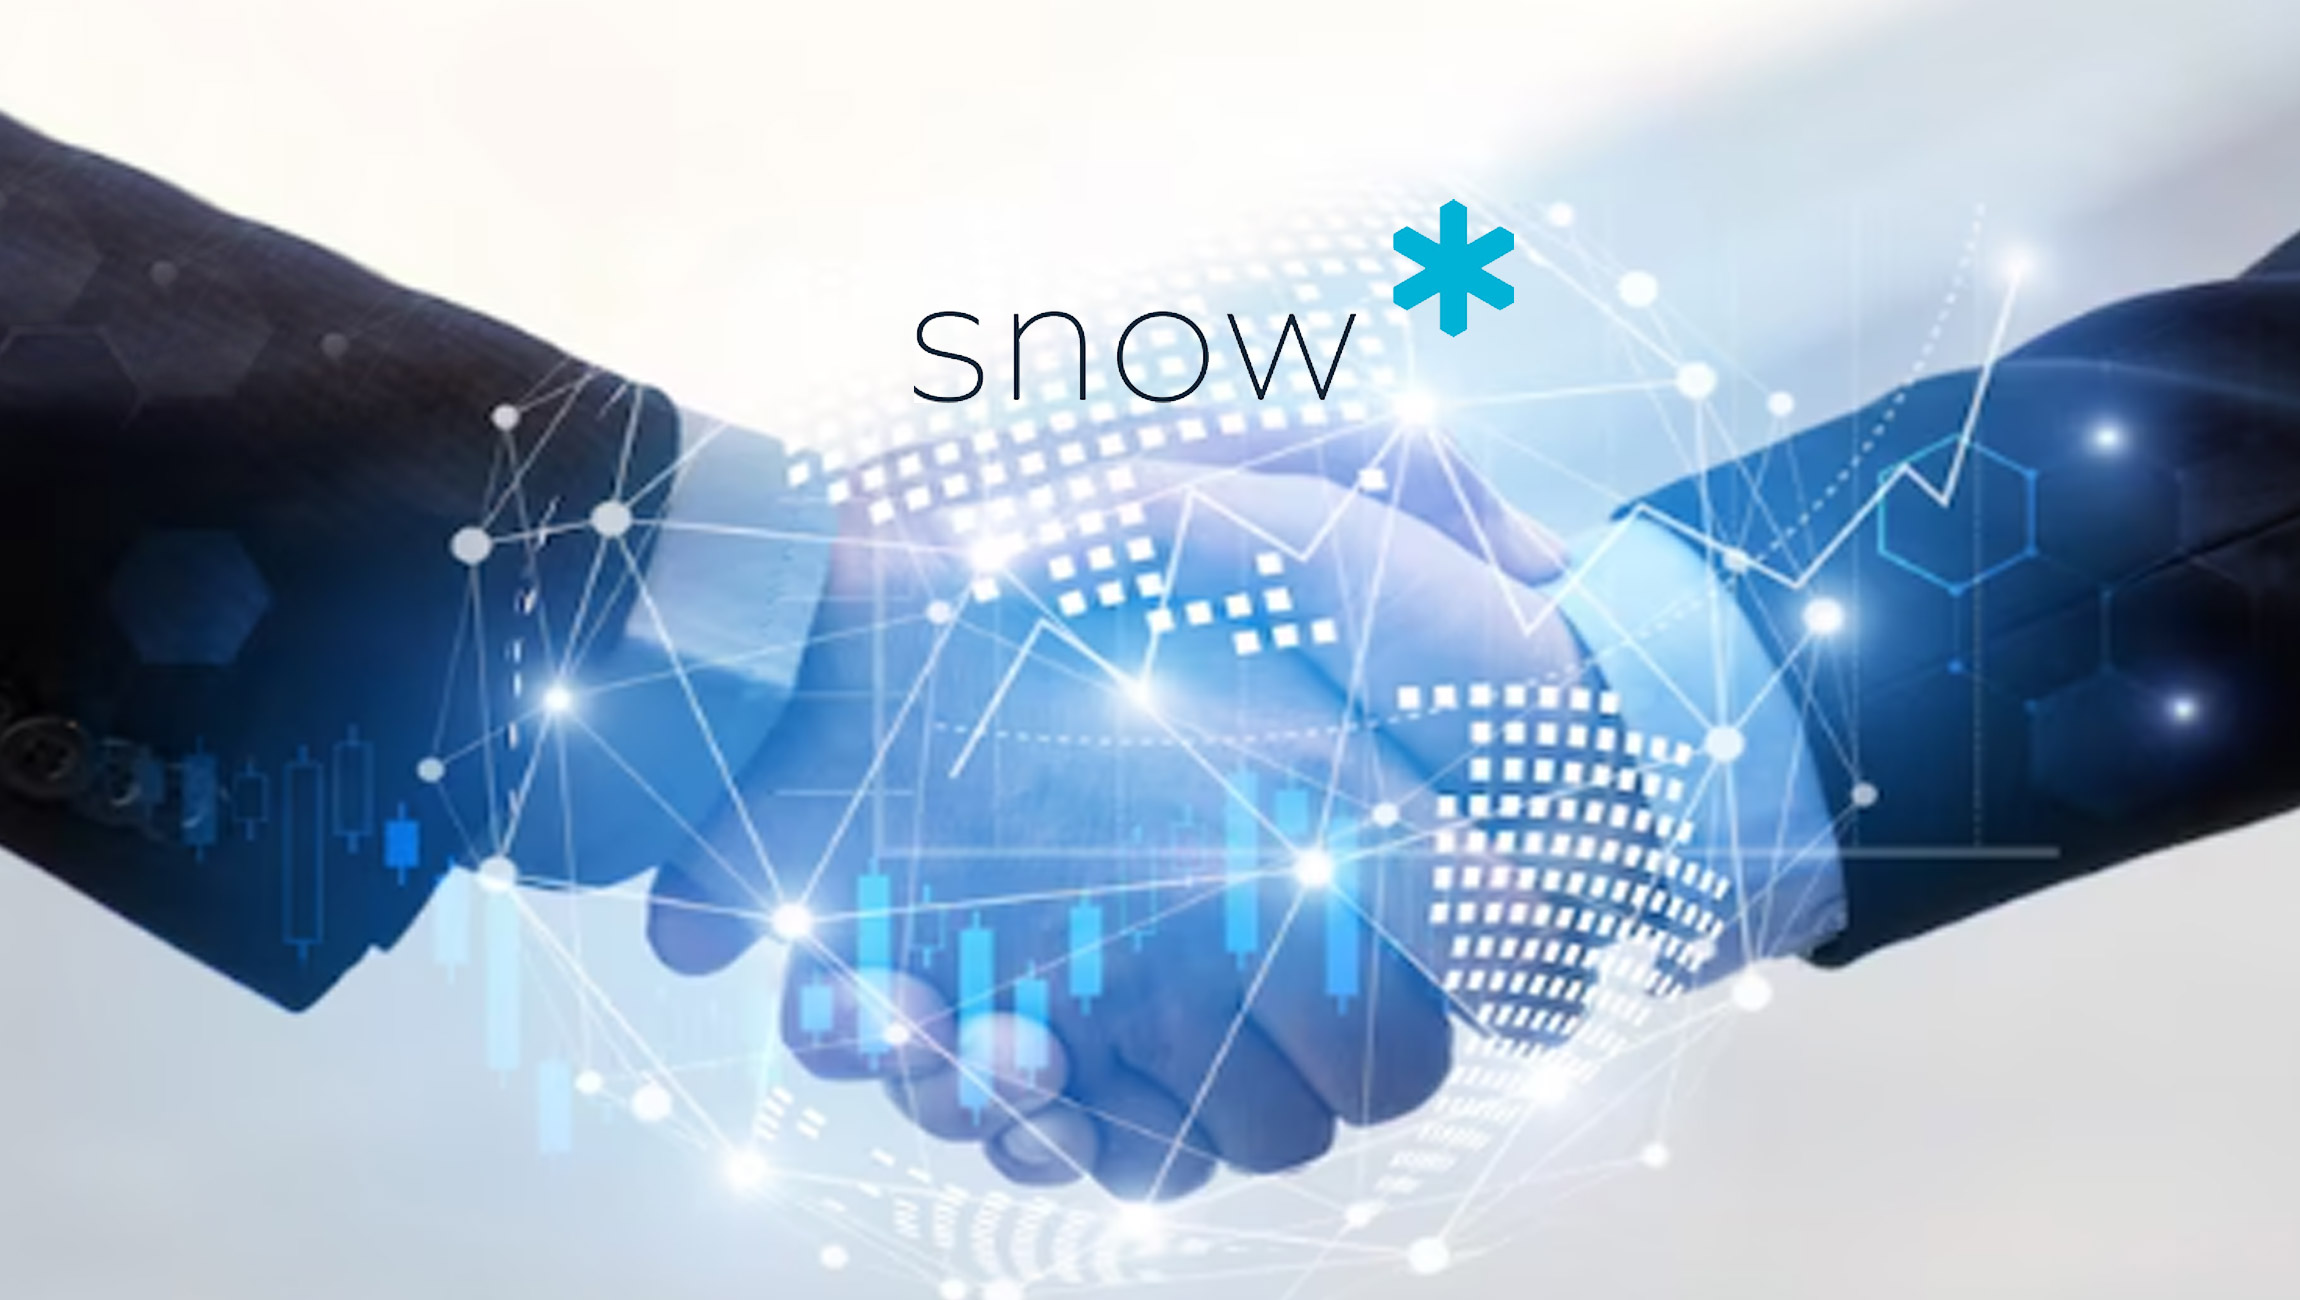 Snow Software Introduces New Global Partner Program to Drive Exponential Growth in Channel Ecosystem